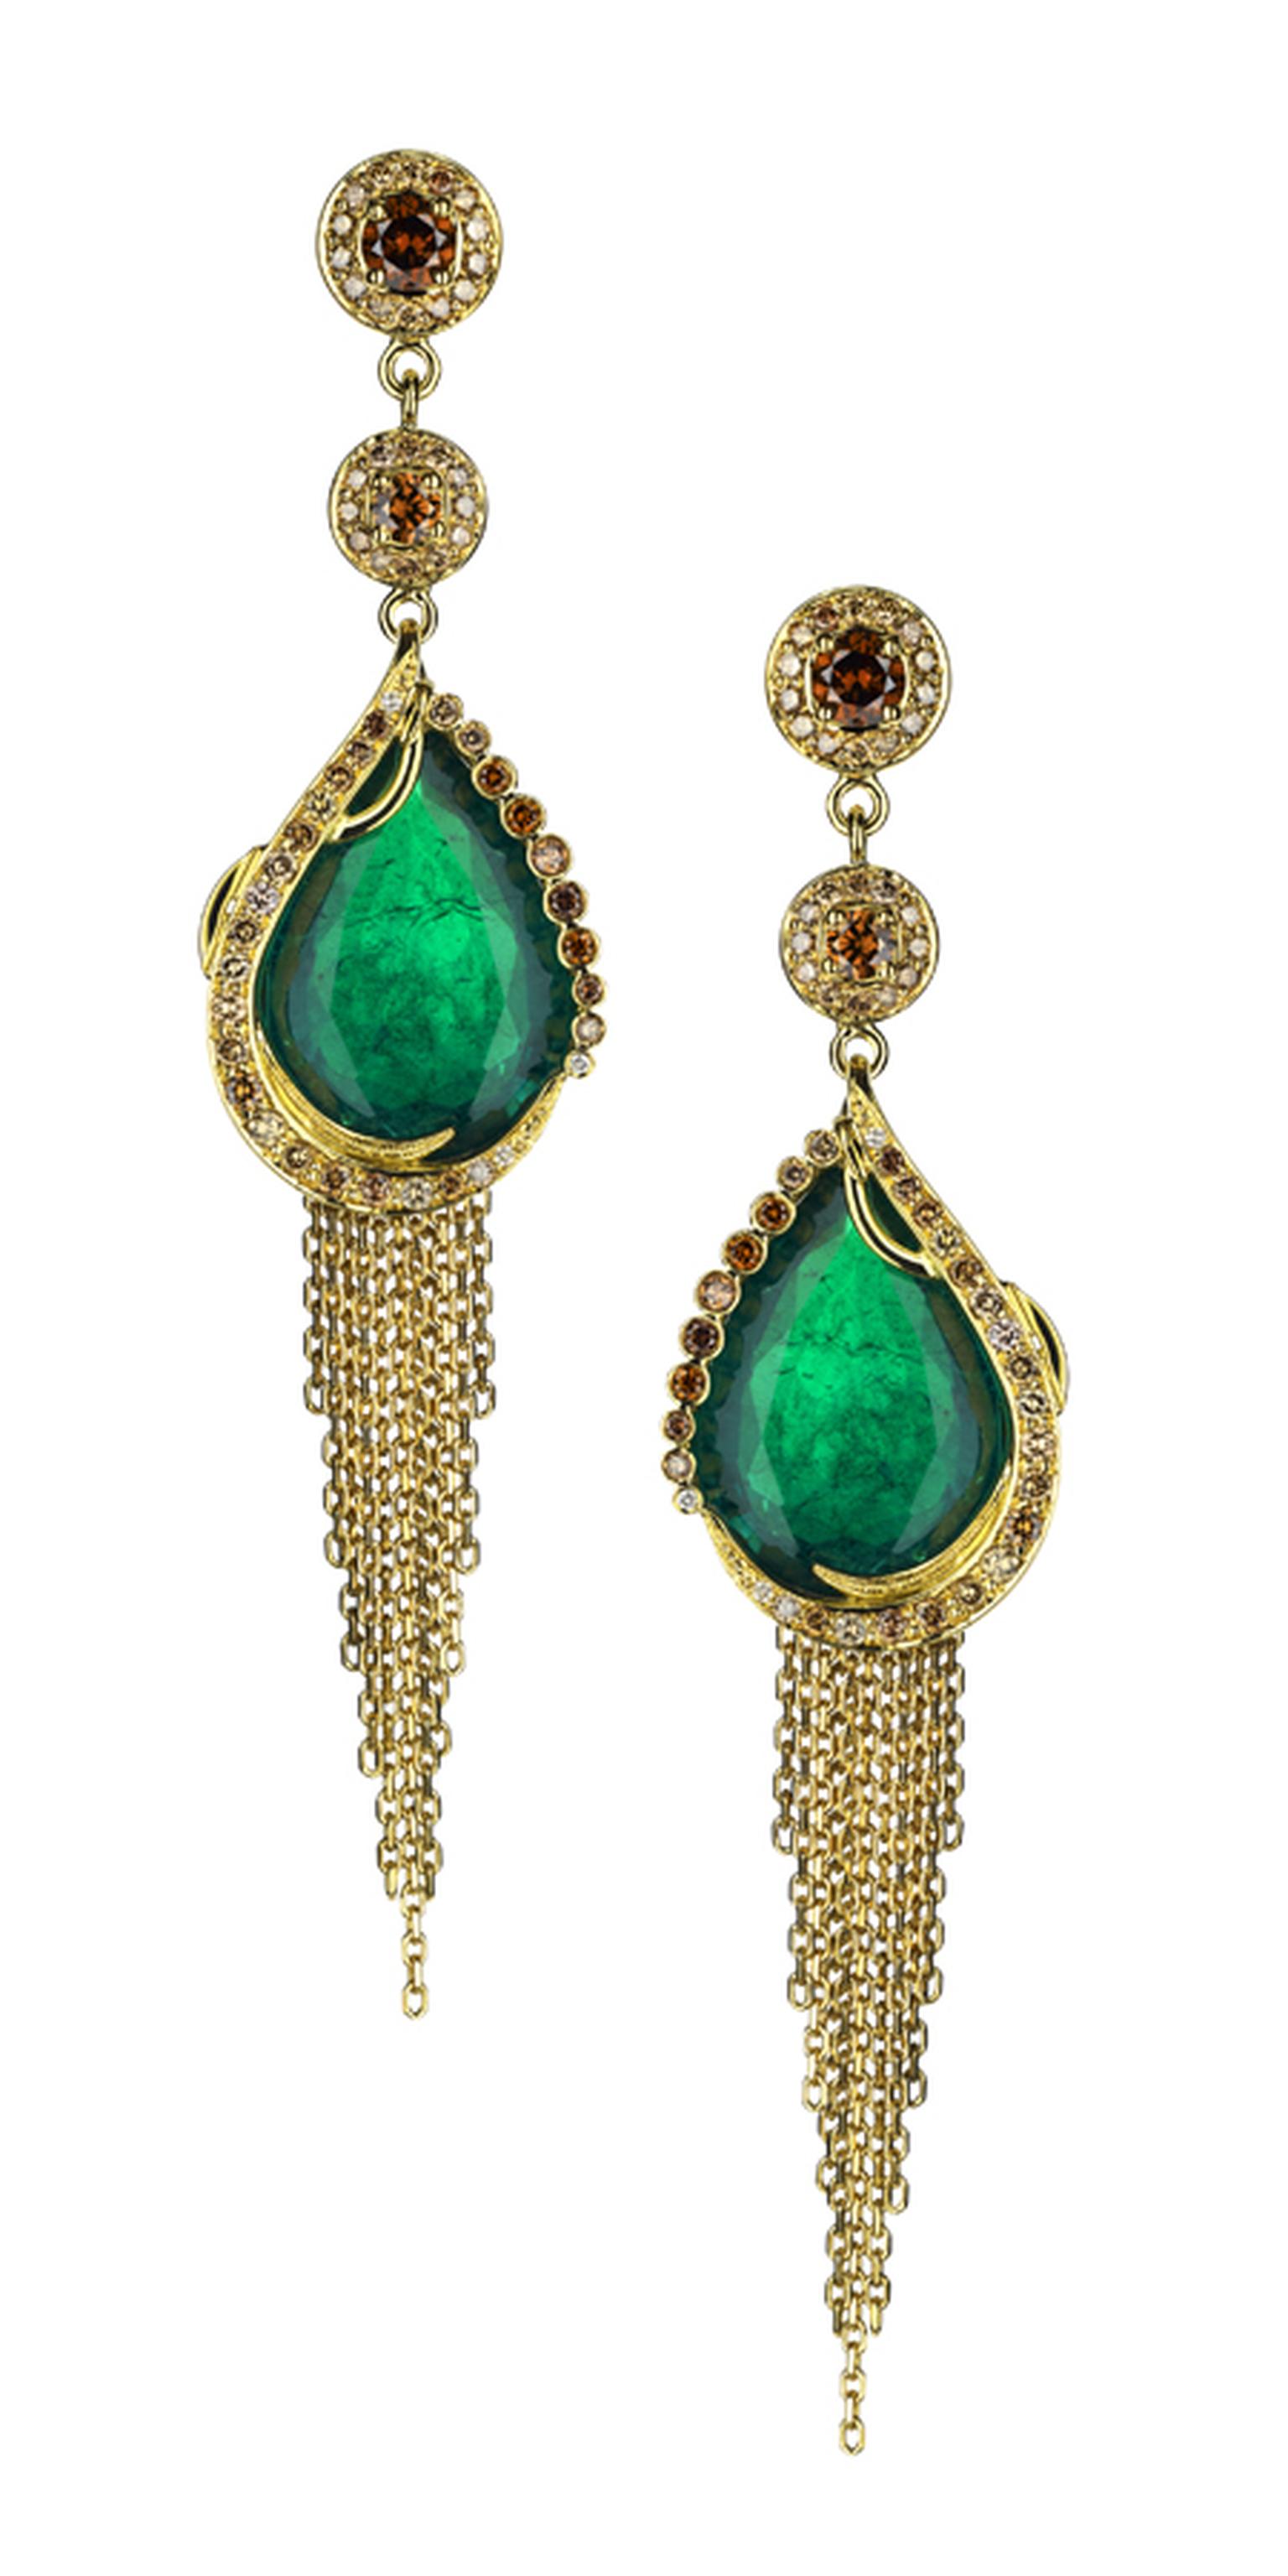 Ana de Costa. Gandhi earrings in 18ct yellow gold, pave set with natural cognac diamonds. Ethically mined Gemfields Zambian emeralds. Price from £100,000.